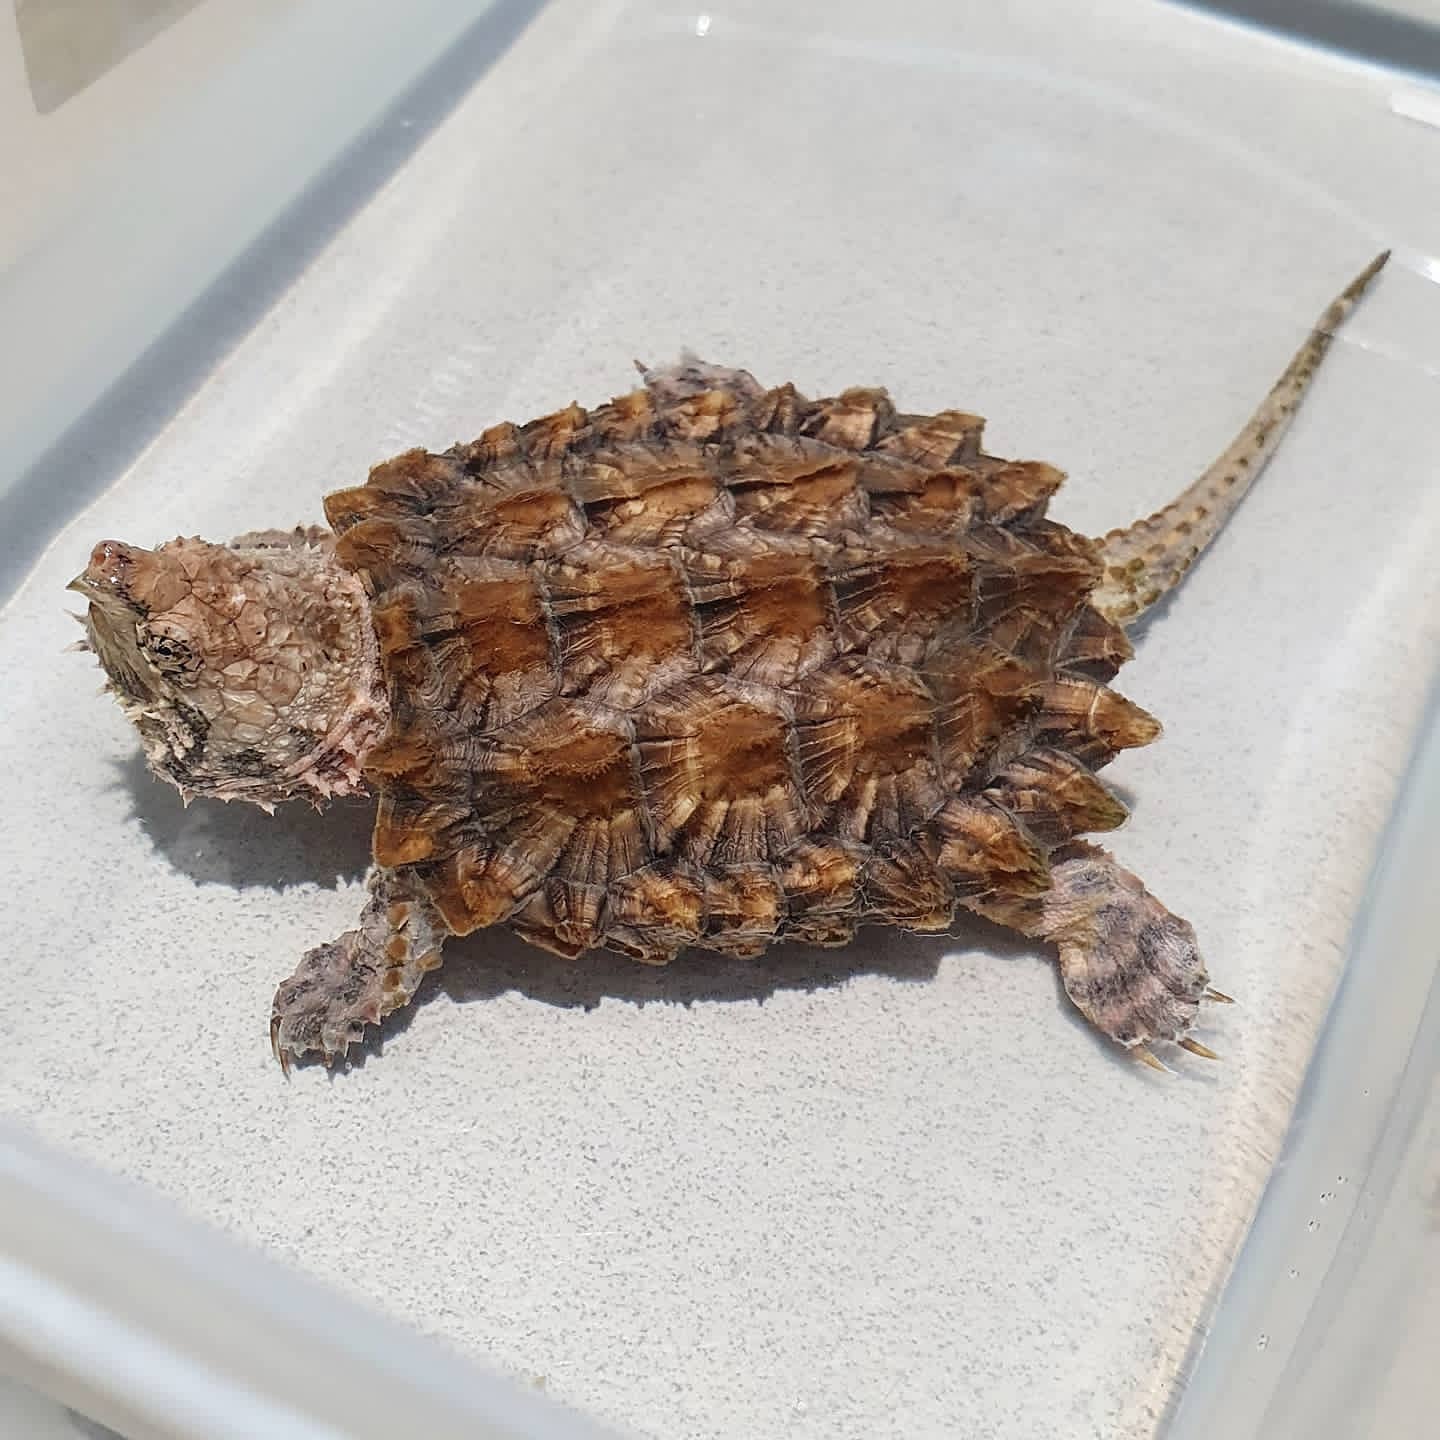 Alligator Snapping Turtle for sale online